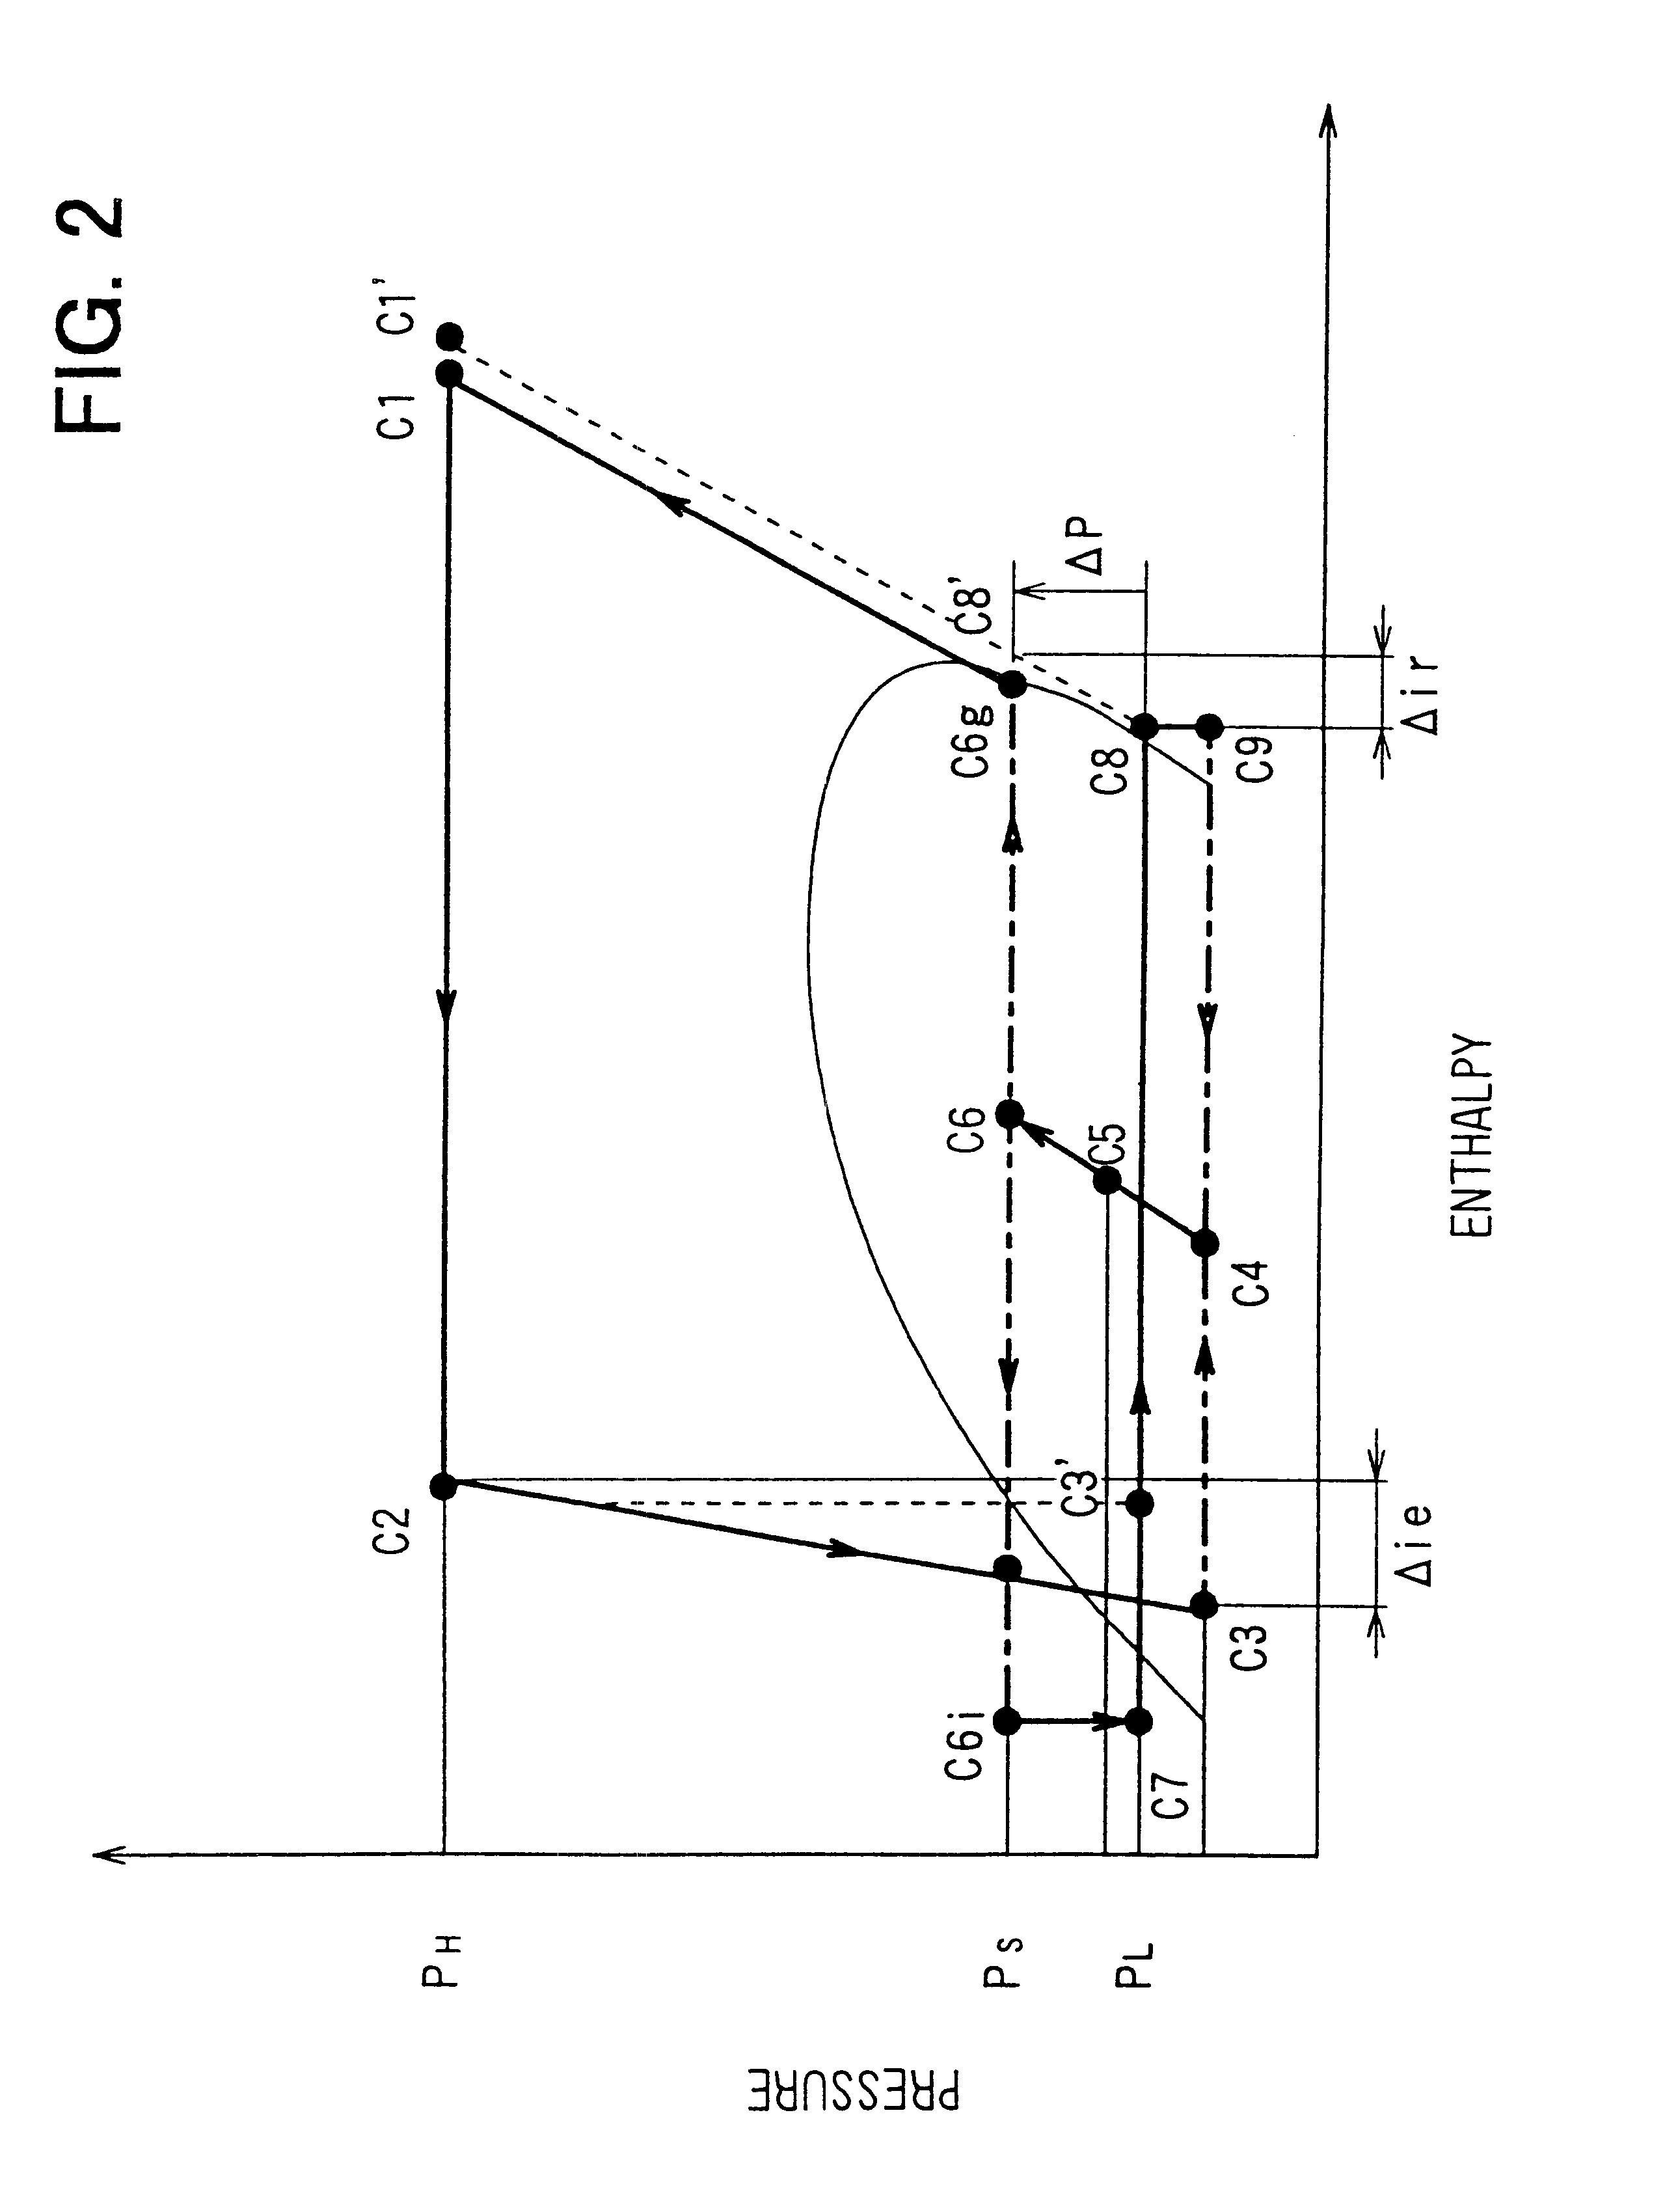 Ejector cycle system with critical refrigerant pressure